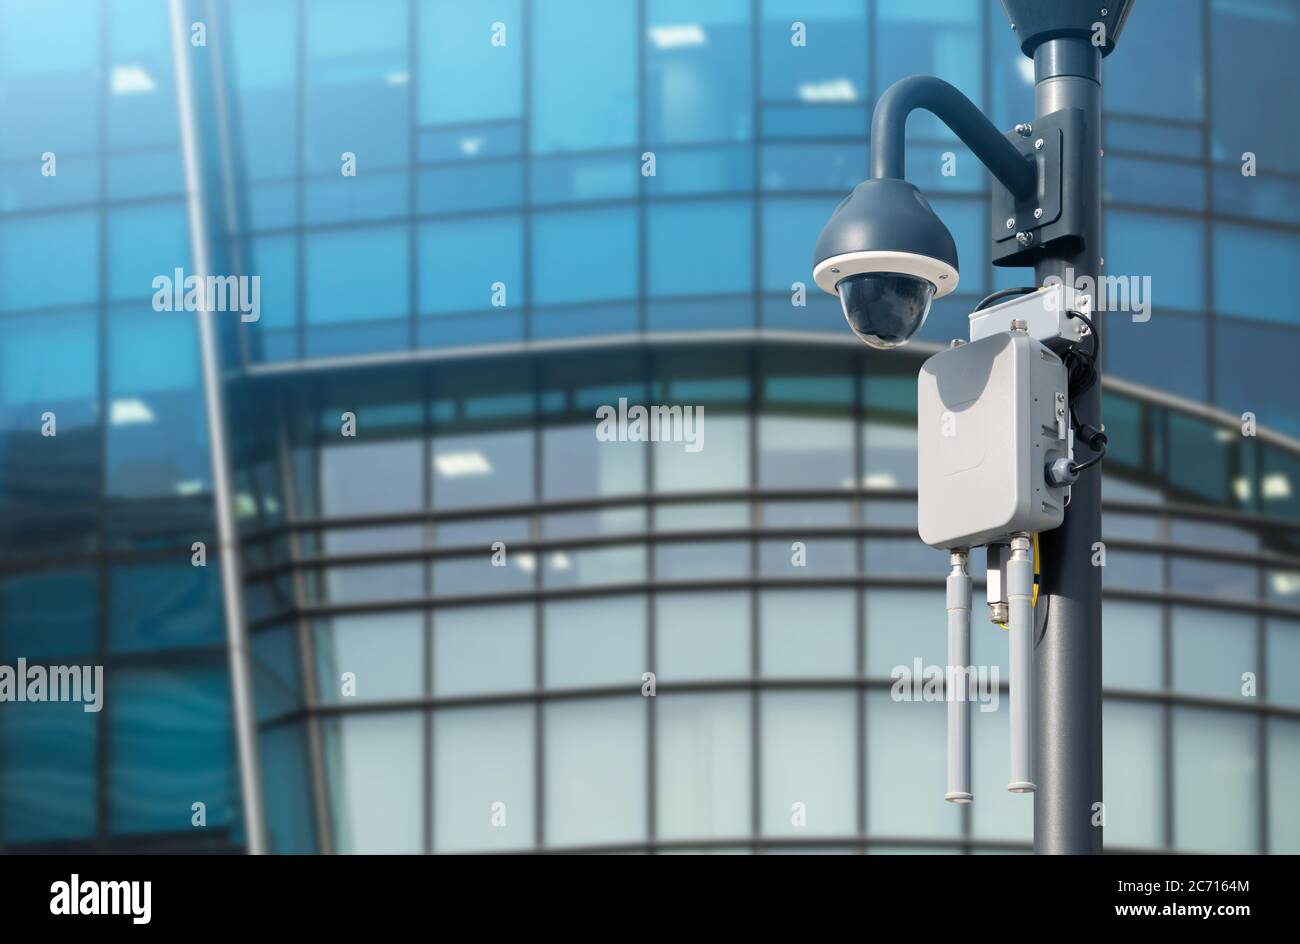 Surveillance camera with wireless transmitter. City security system Stock Photo